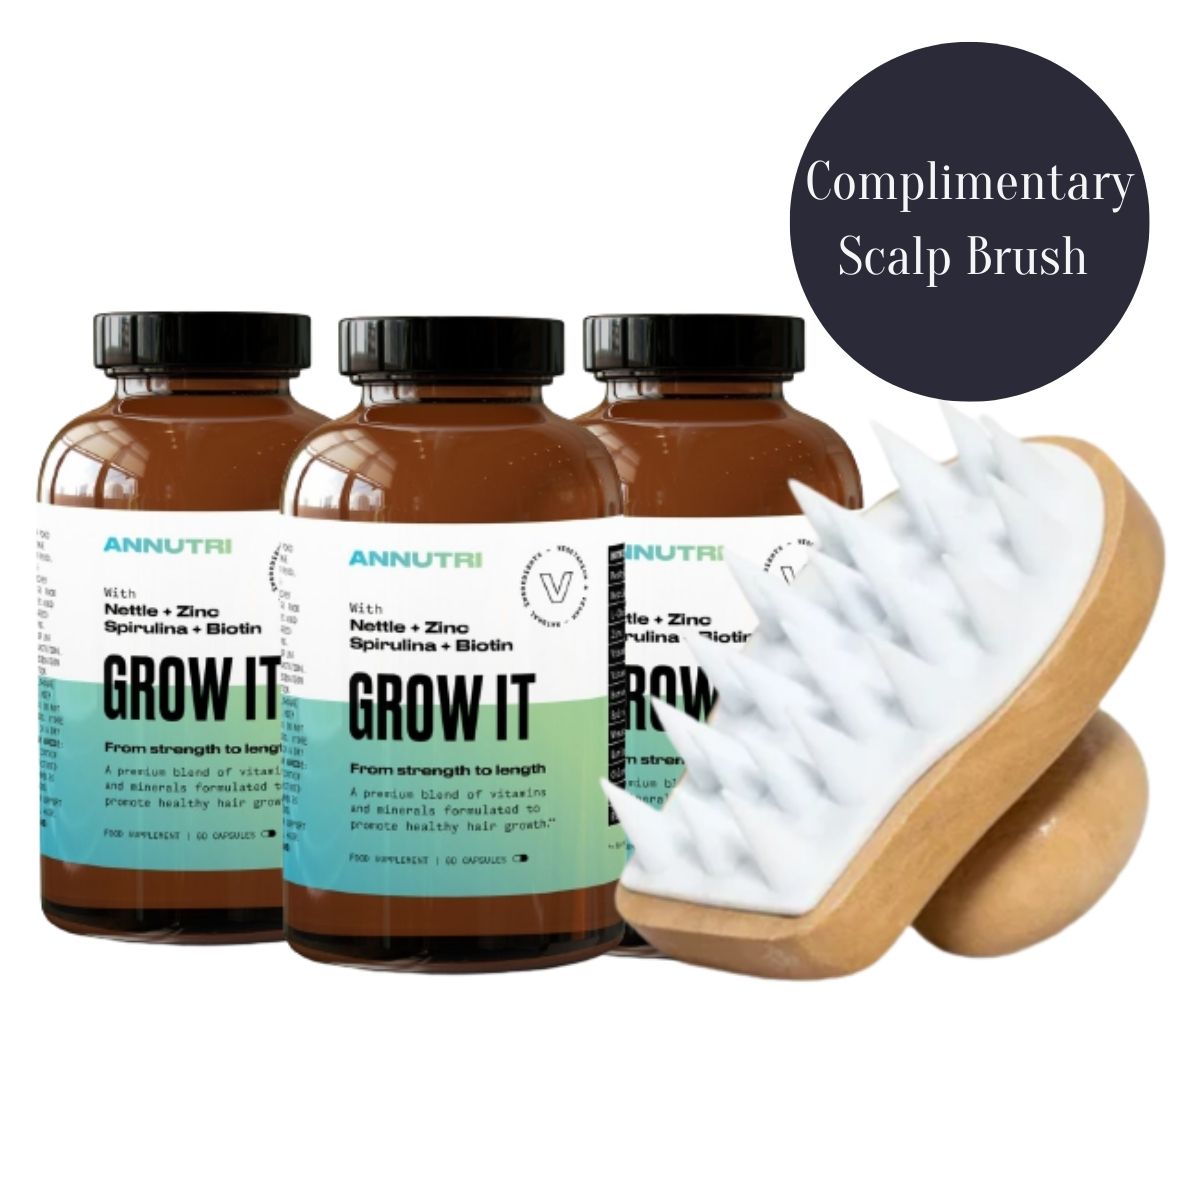 Annutri Grow It Hair Supplement 3 Month Supply with Complimentary Scalp Brush